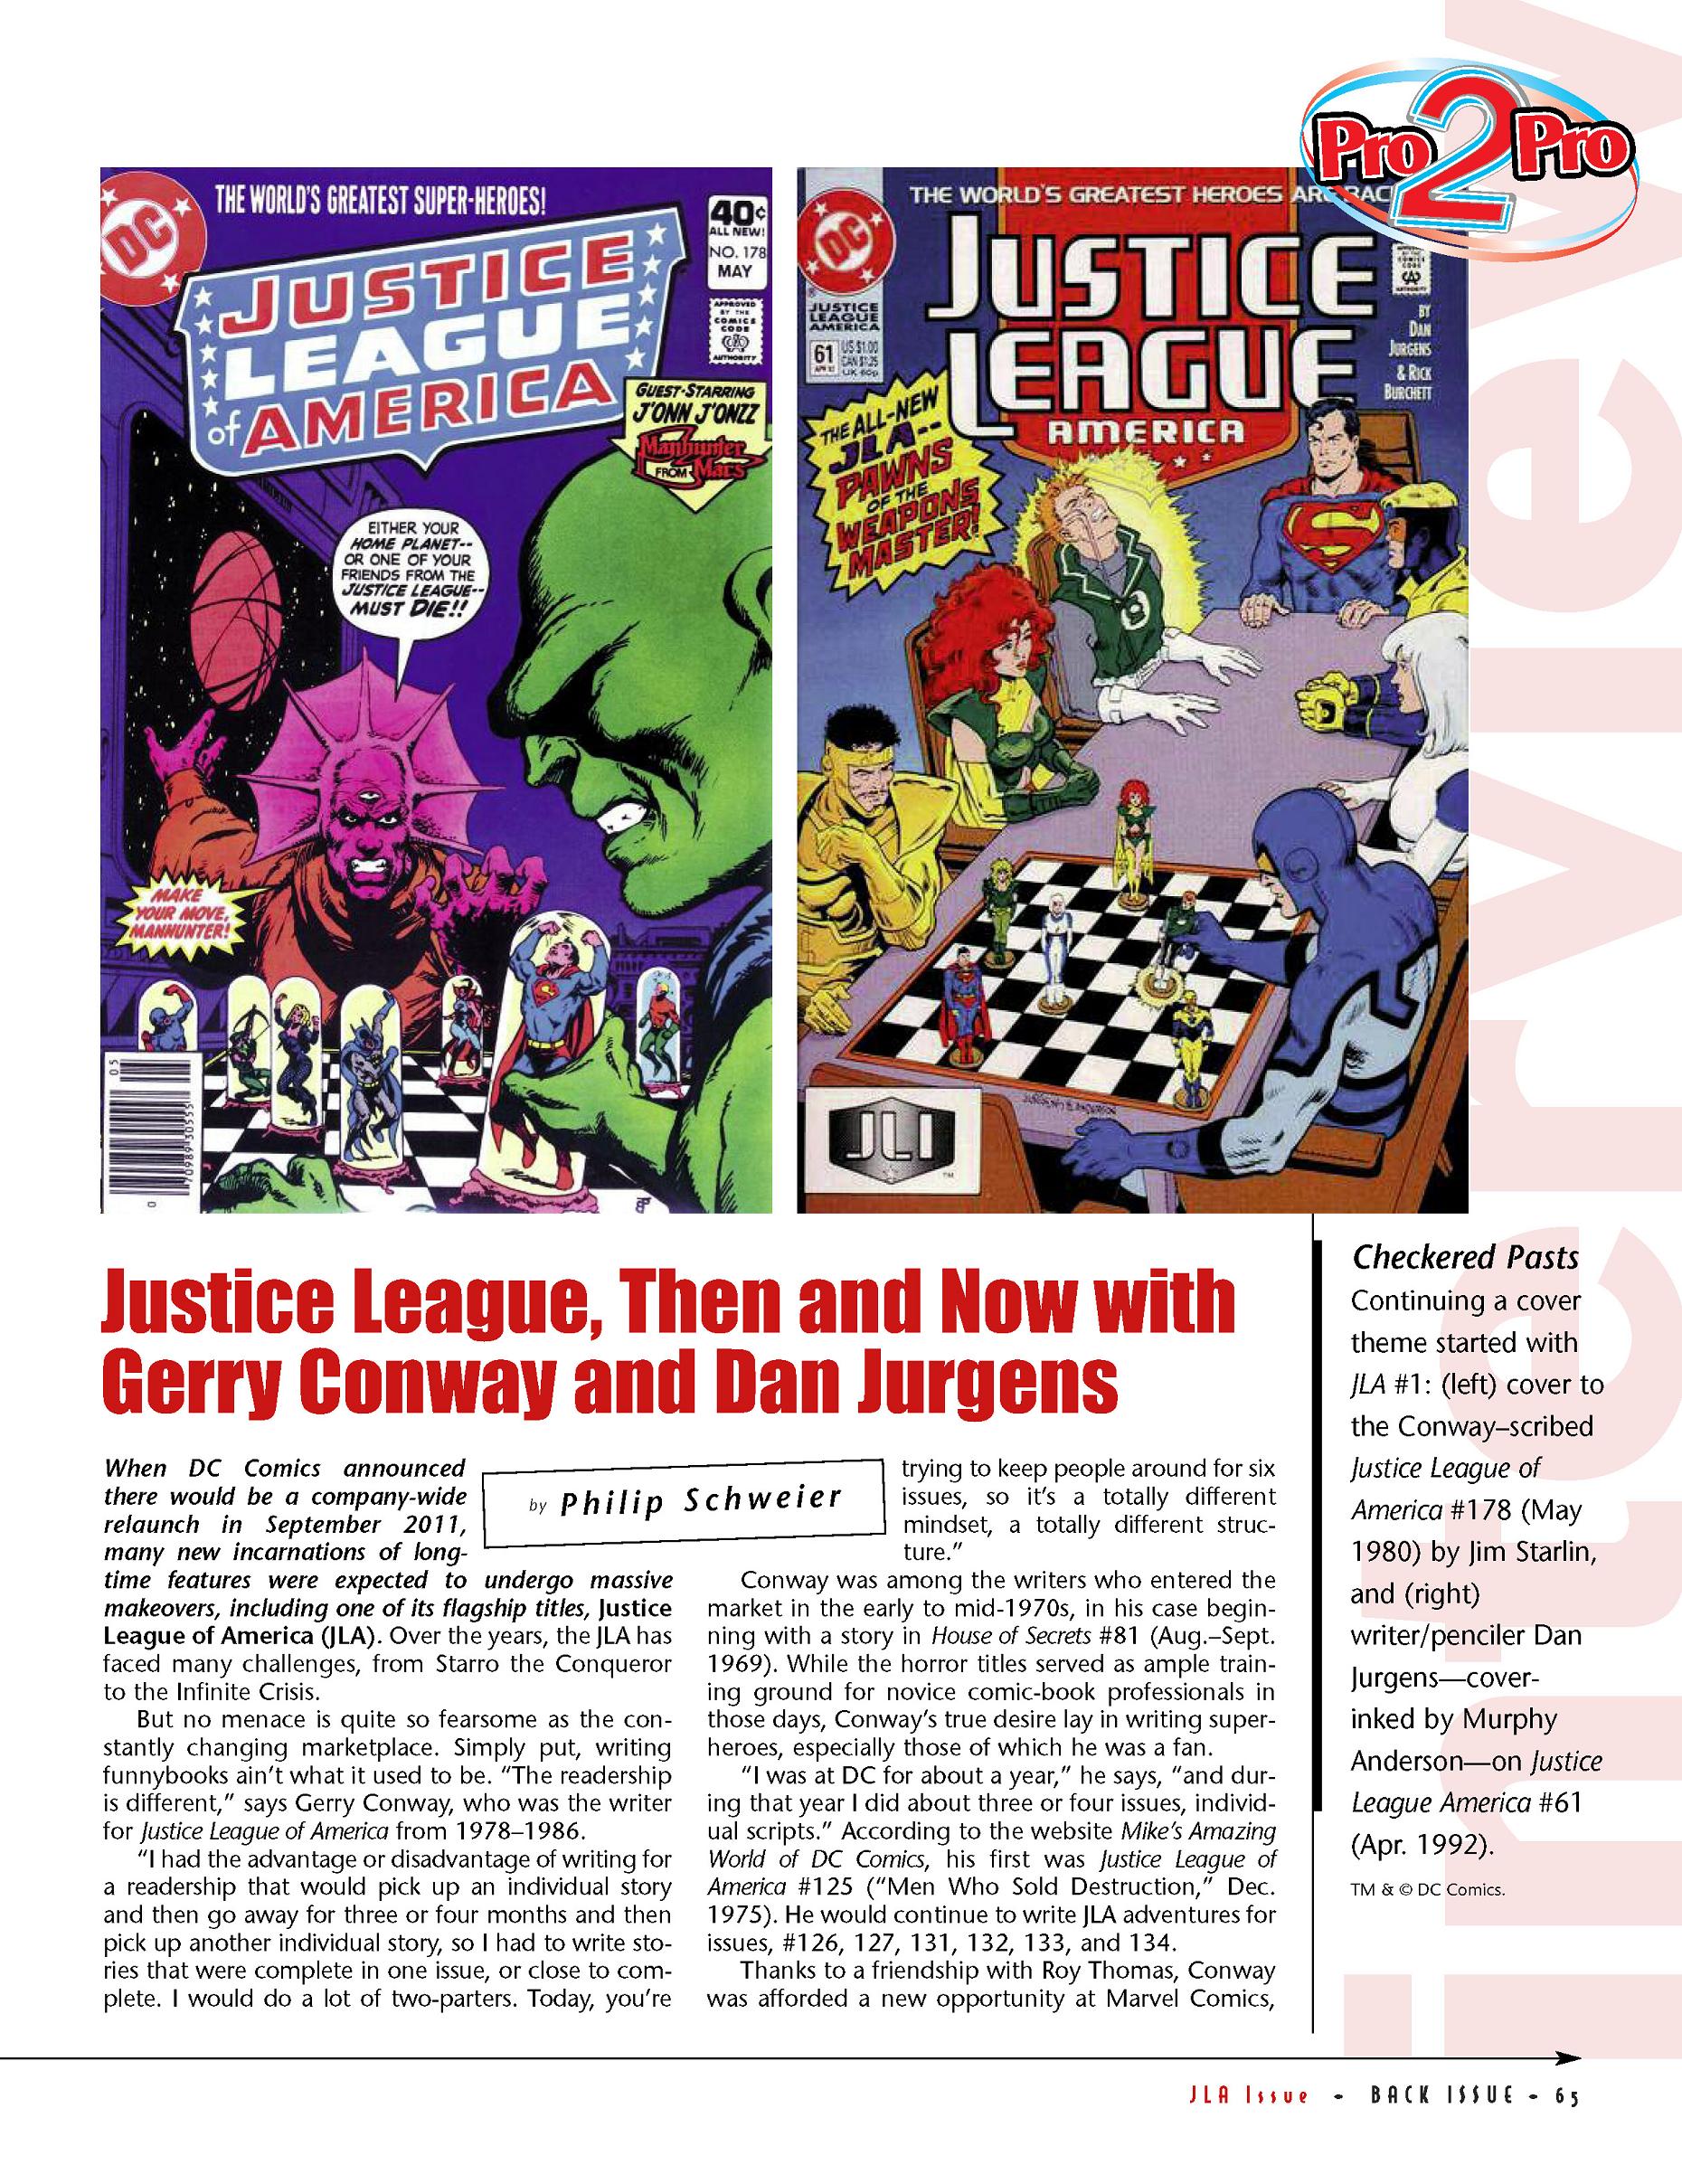 Read online Back Issue comic -  Issue #58 - 65